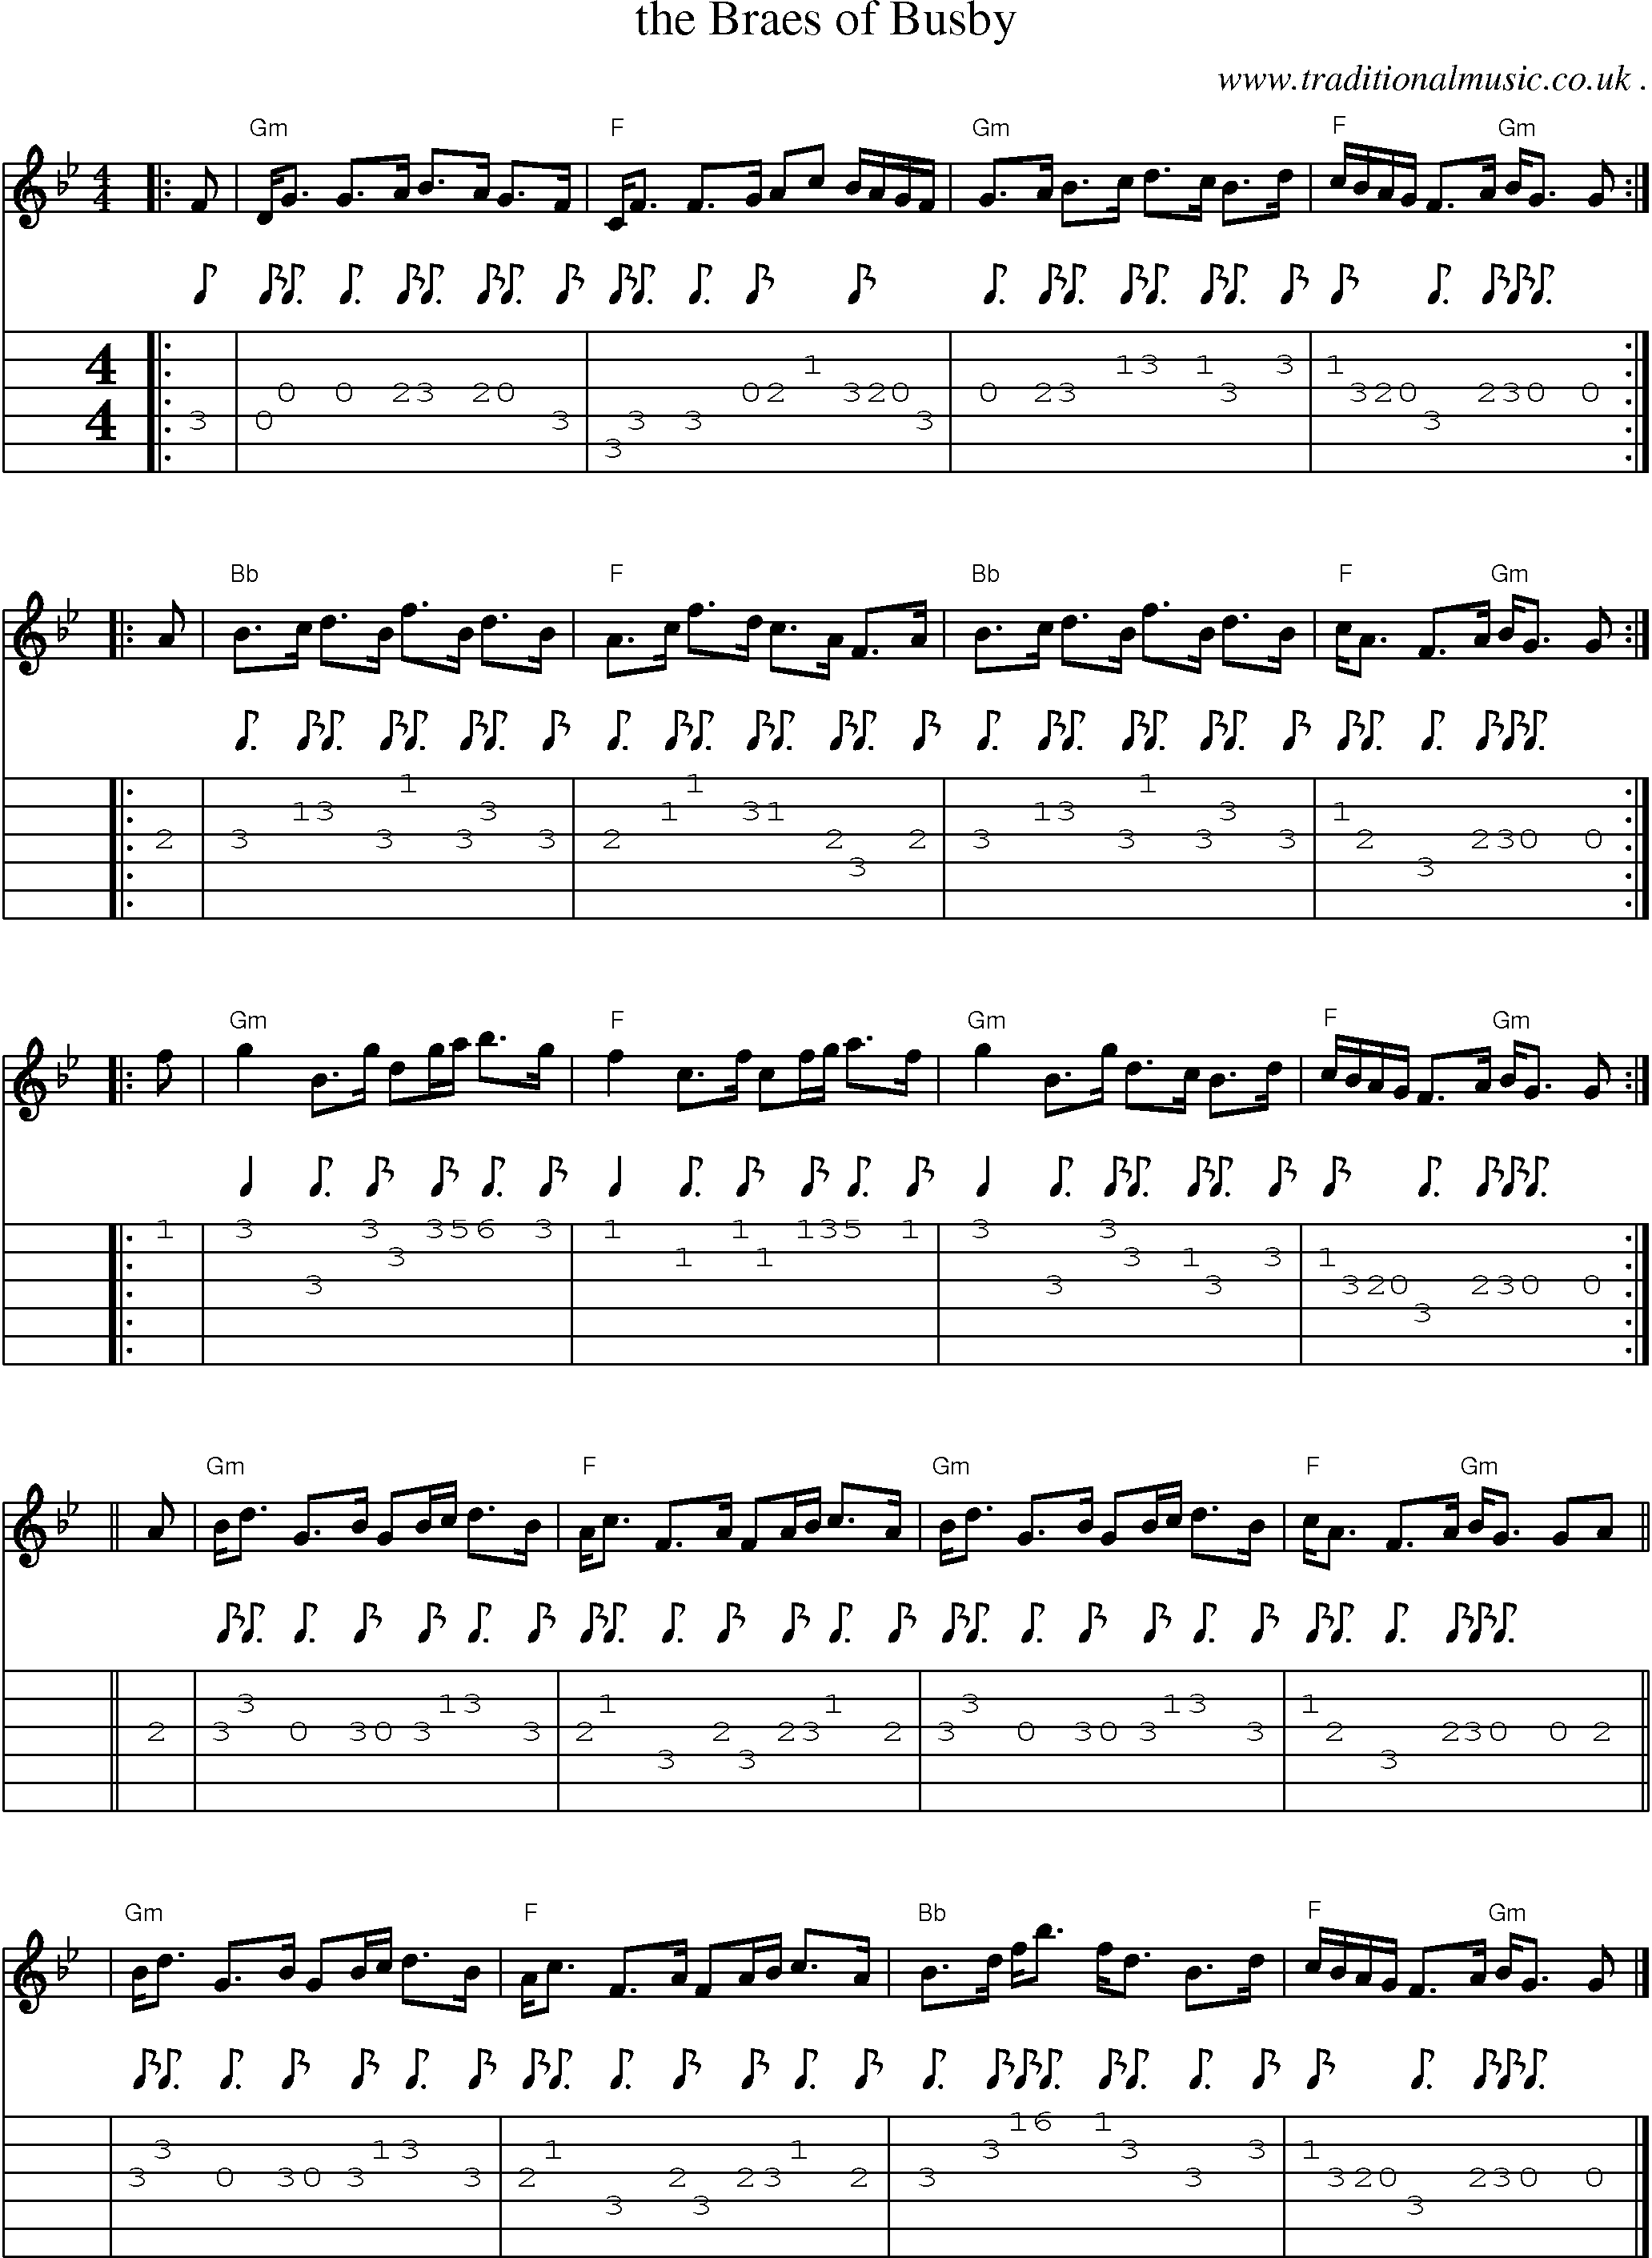 Sheet-music  score, Chords and Guitar Tabs for The Braes Of Busby